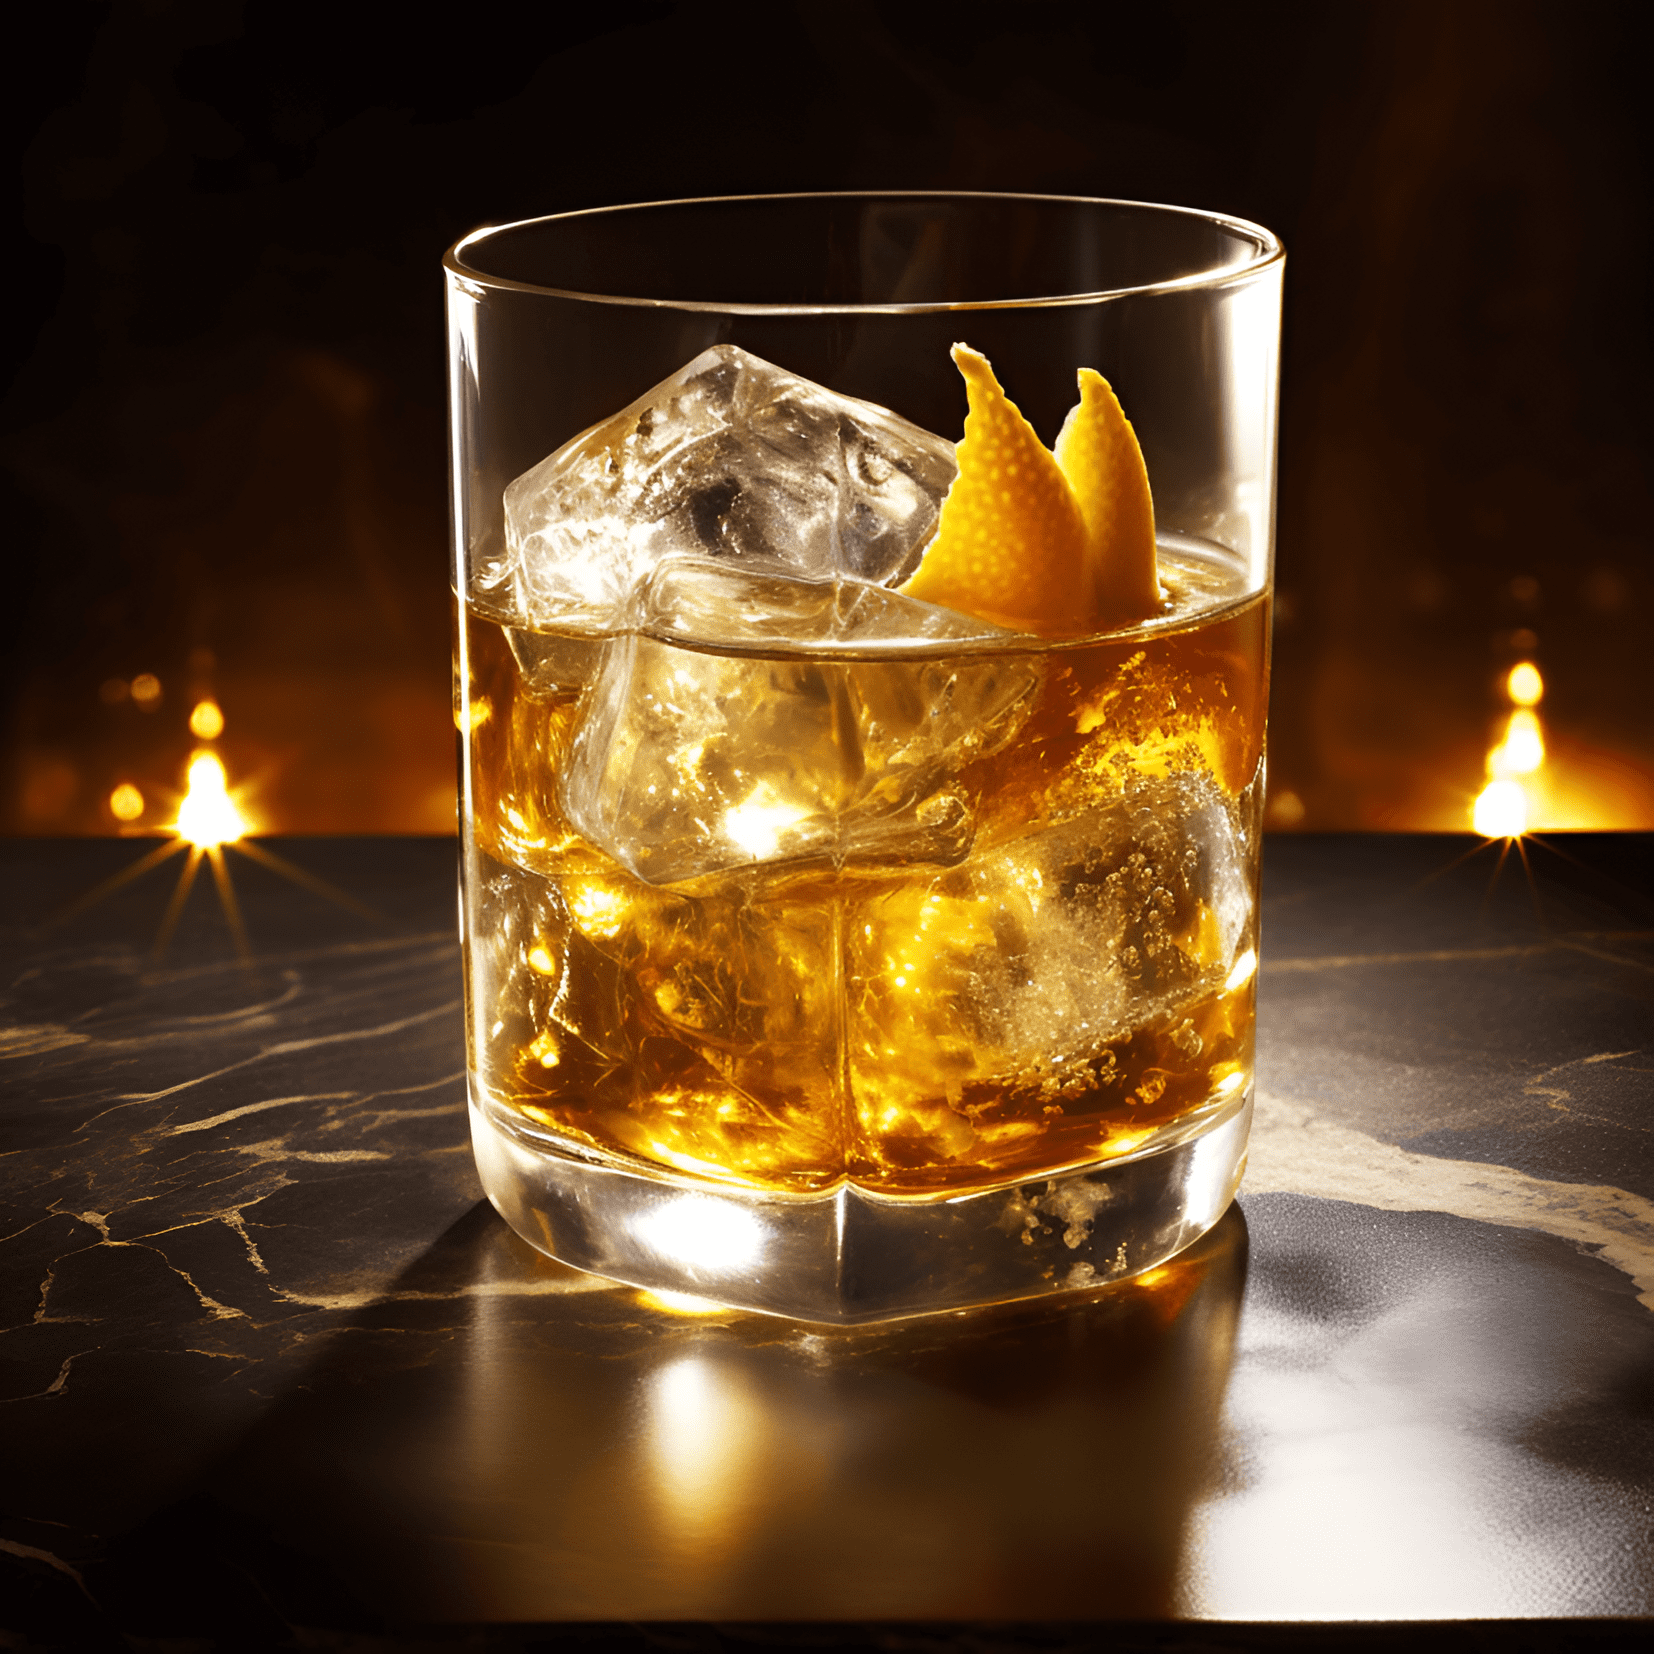 French Connection Cocktail Recipe - The French Connection has a rich, smooth, and slightly sweet taste with a hint of nuttiness from the Amaretto. The Cognac adds a depth of flavor and warmth, making it a perfect after-dinner drink.